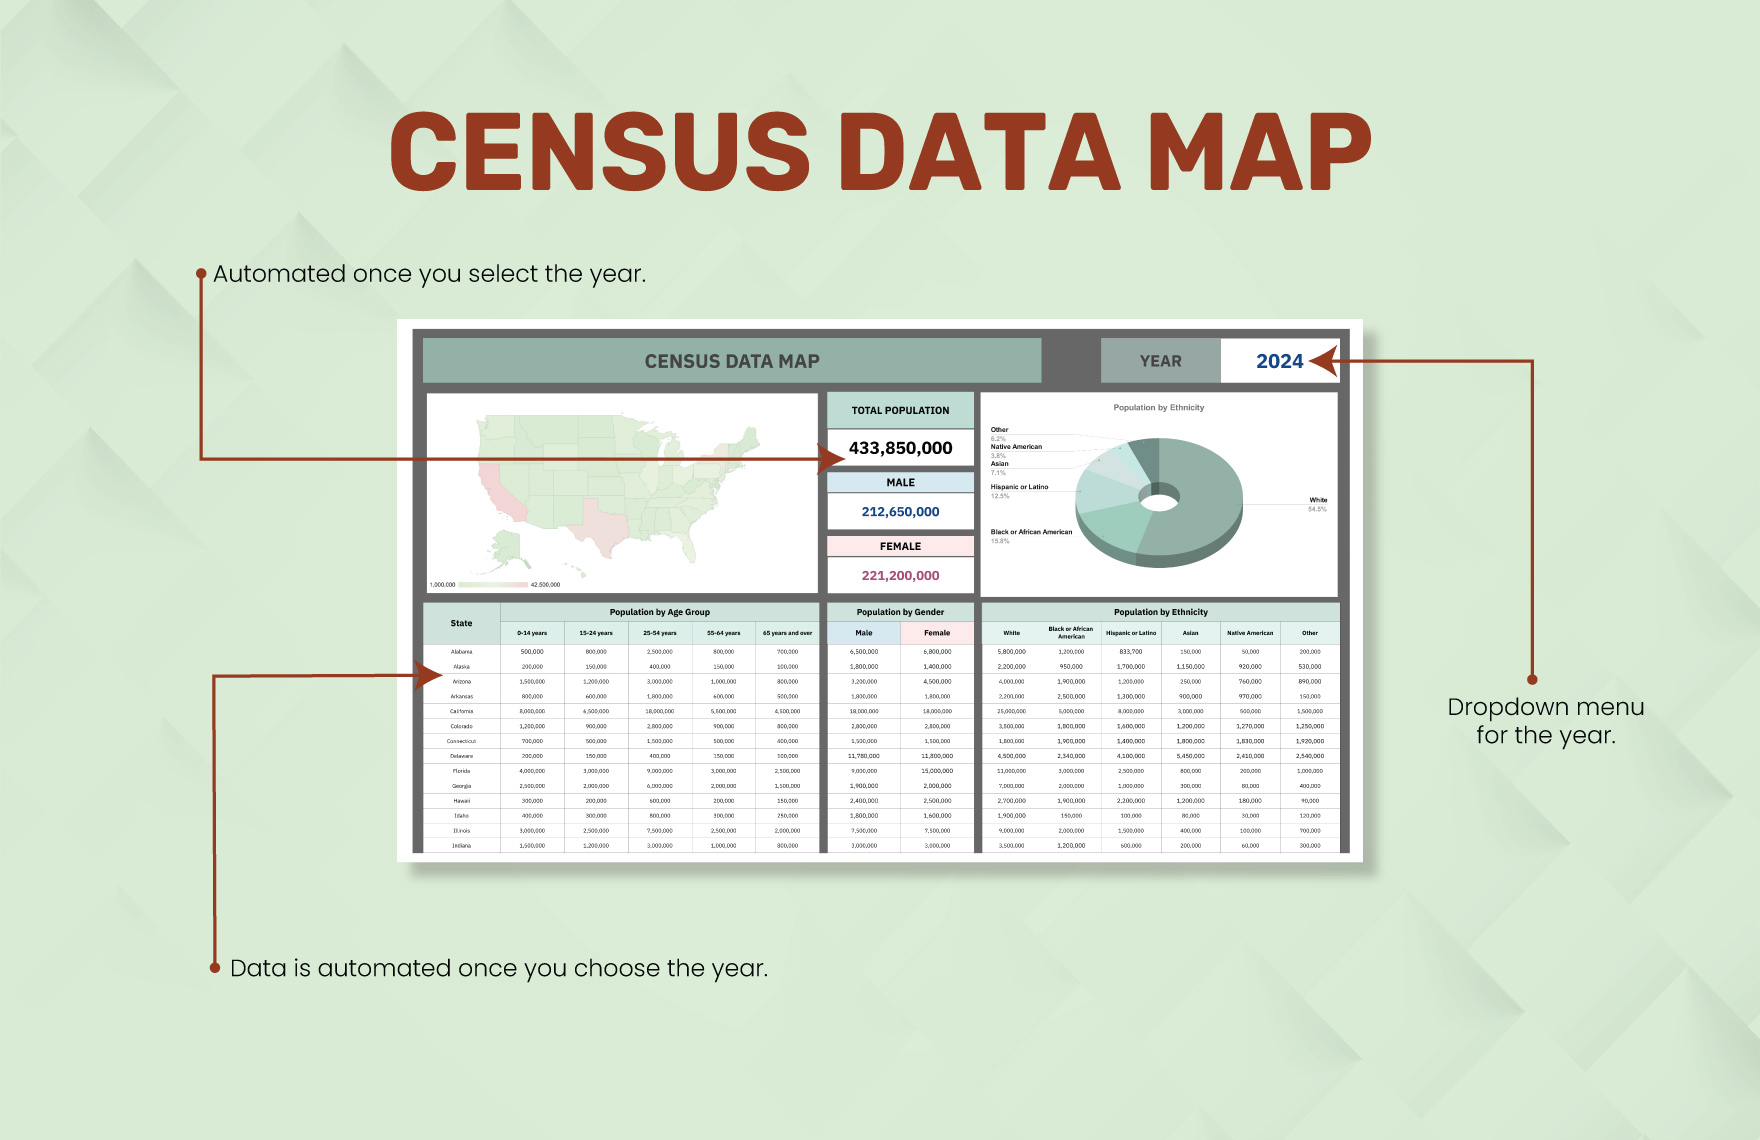 Census Data Map Template